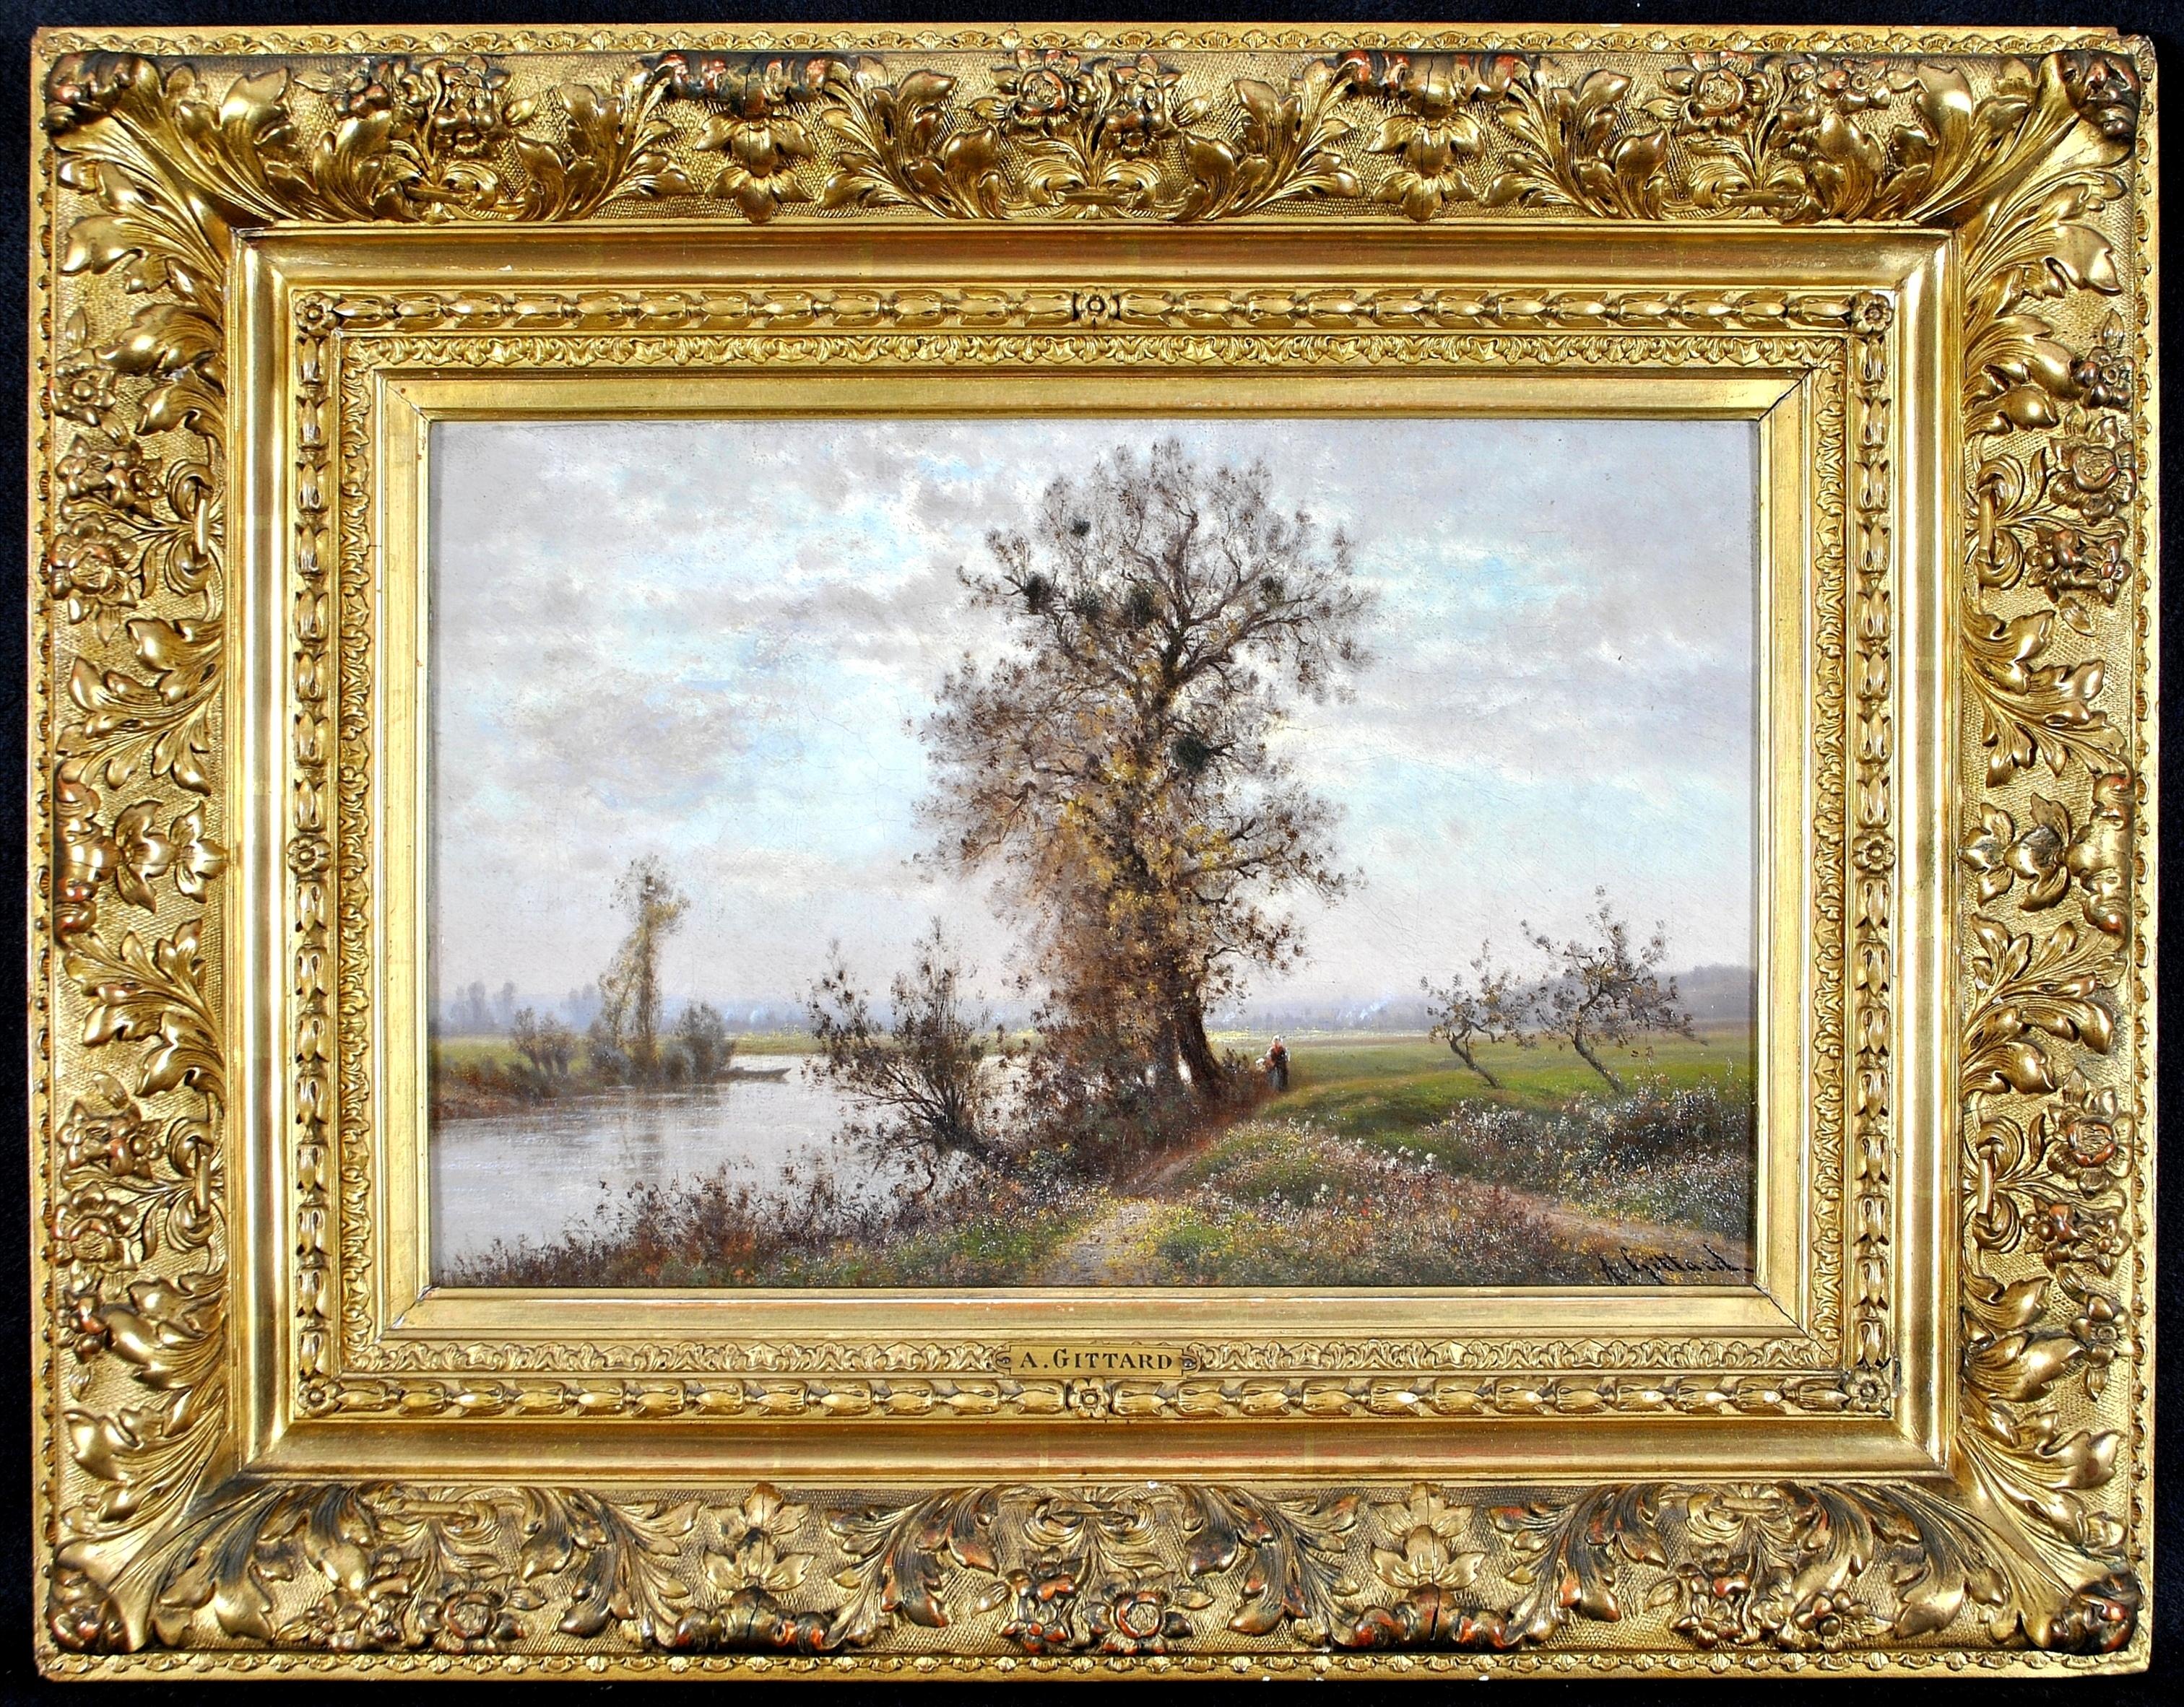 Alexandre Charles Joseph Gittard Landscape Painting - Tranquil River Landscape - 19th Century French Impressionist Oil Painting